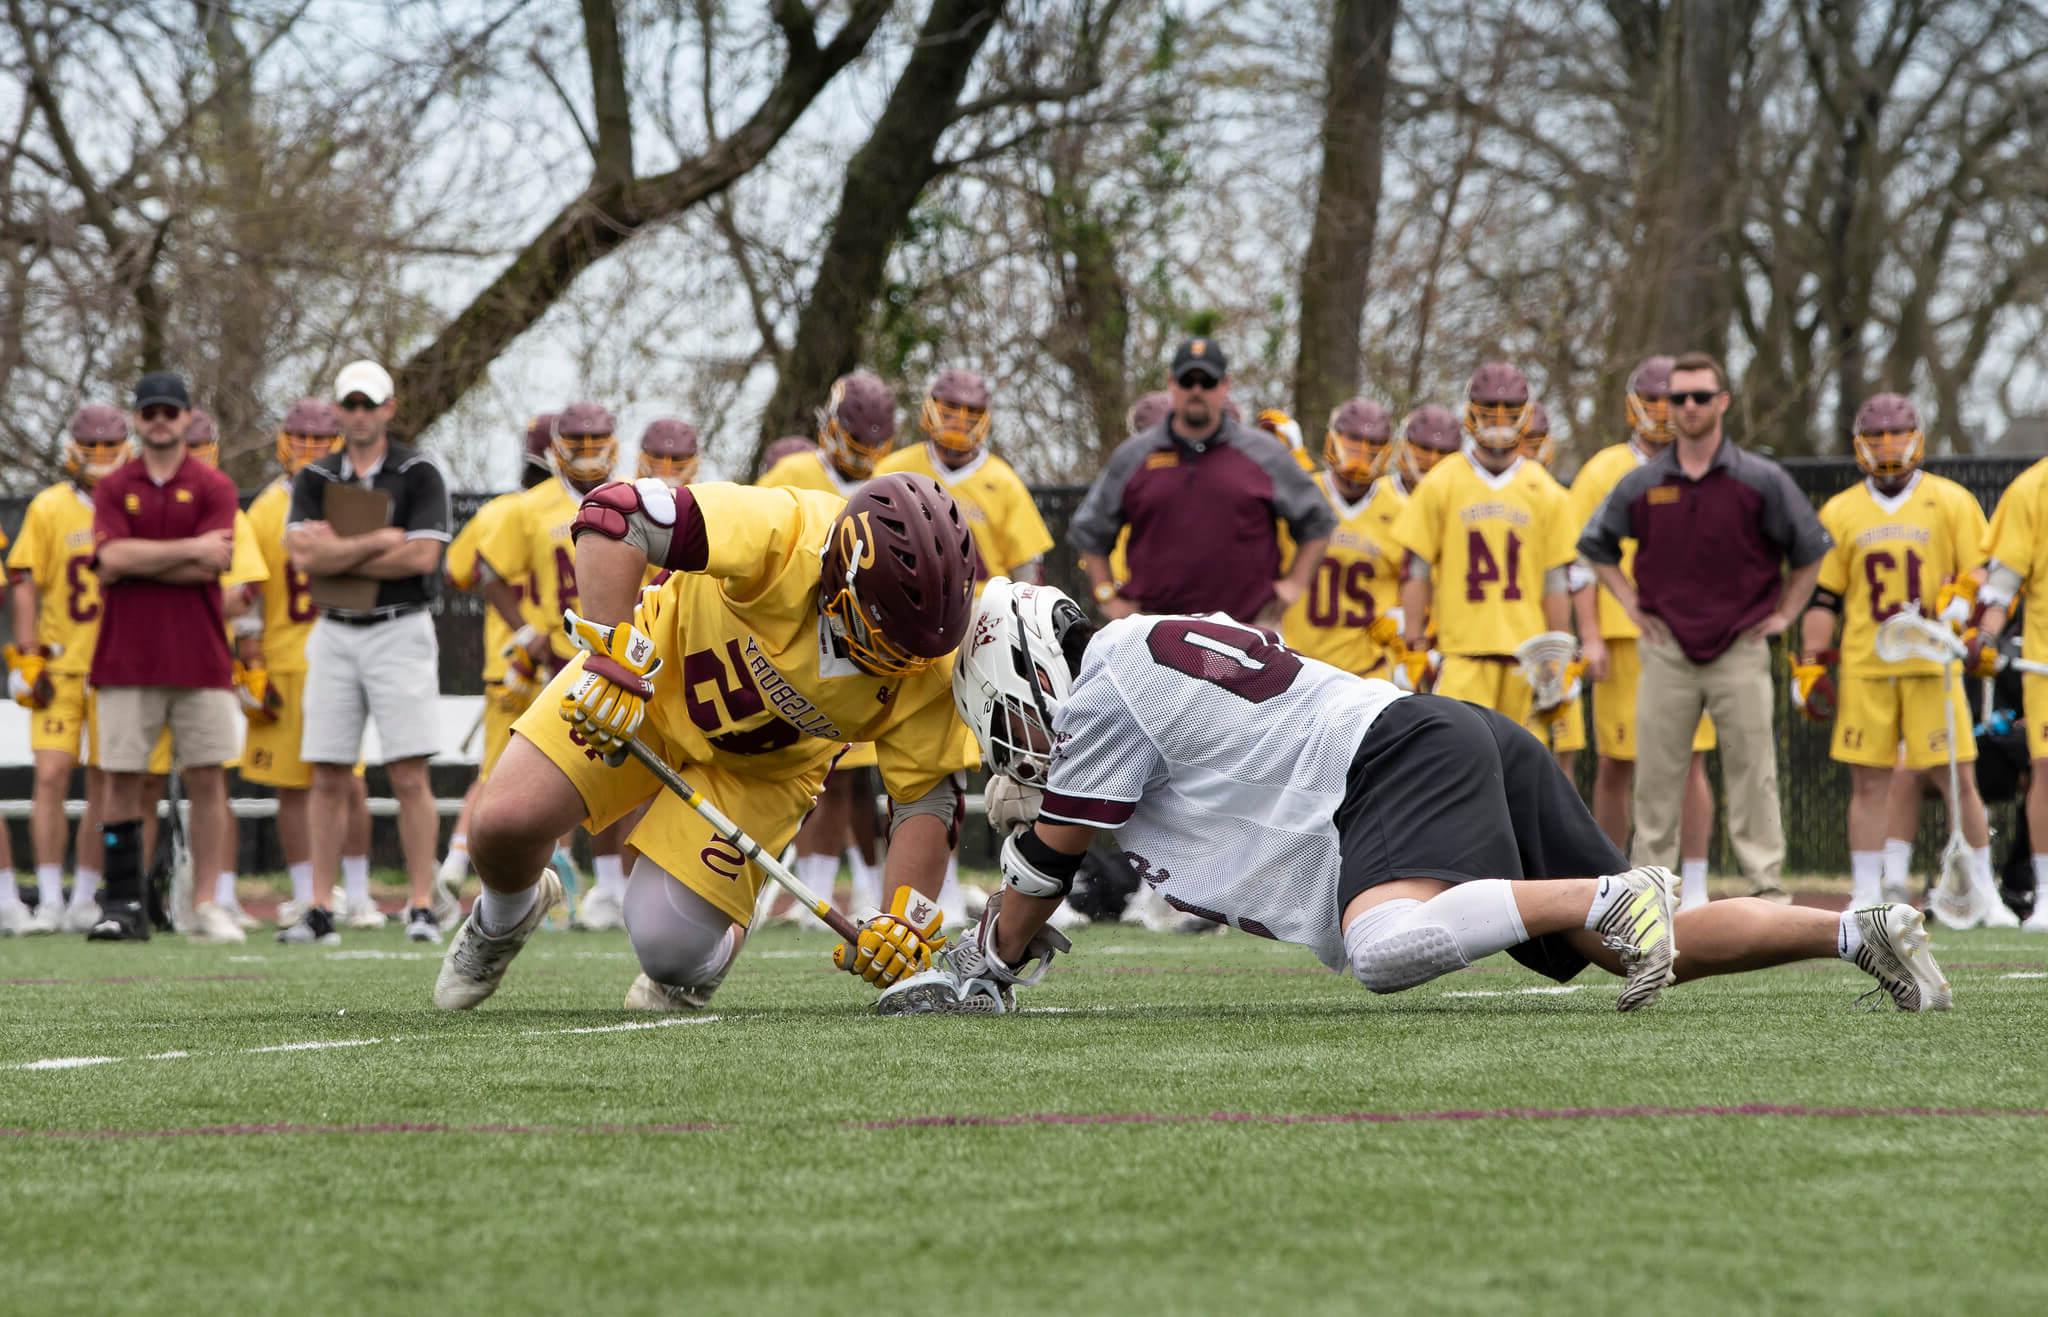 Washington College men's lacrosse faces off agaisnt rival, Salisbury in the 2019 War on the Shore match-up